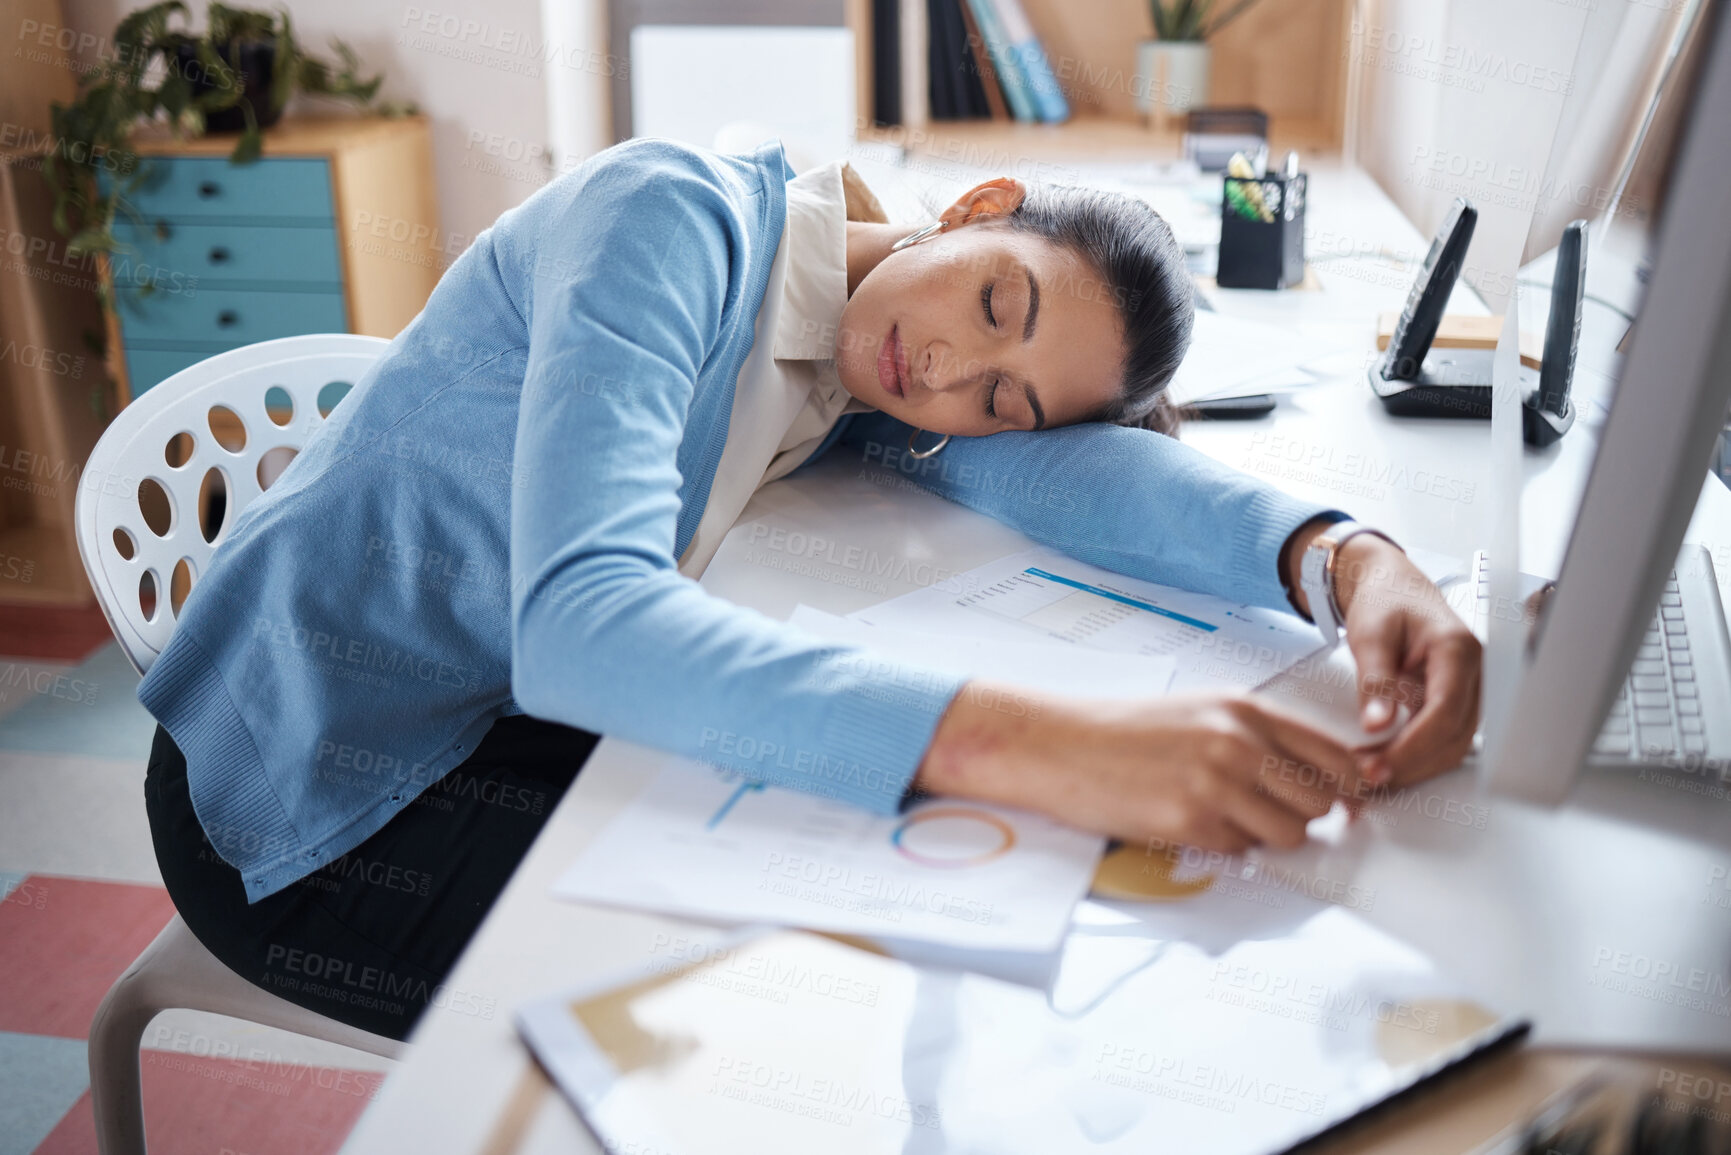 Buy stock photo Shot of a young businesswoman sleeping at her desk in a modern office